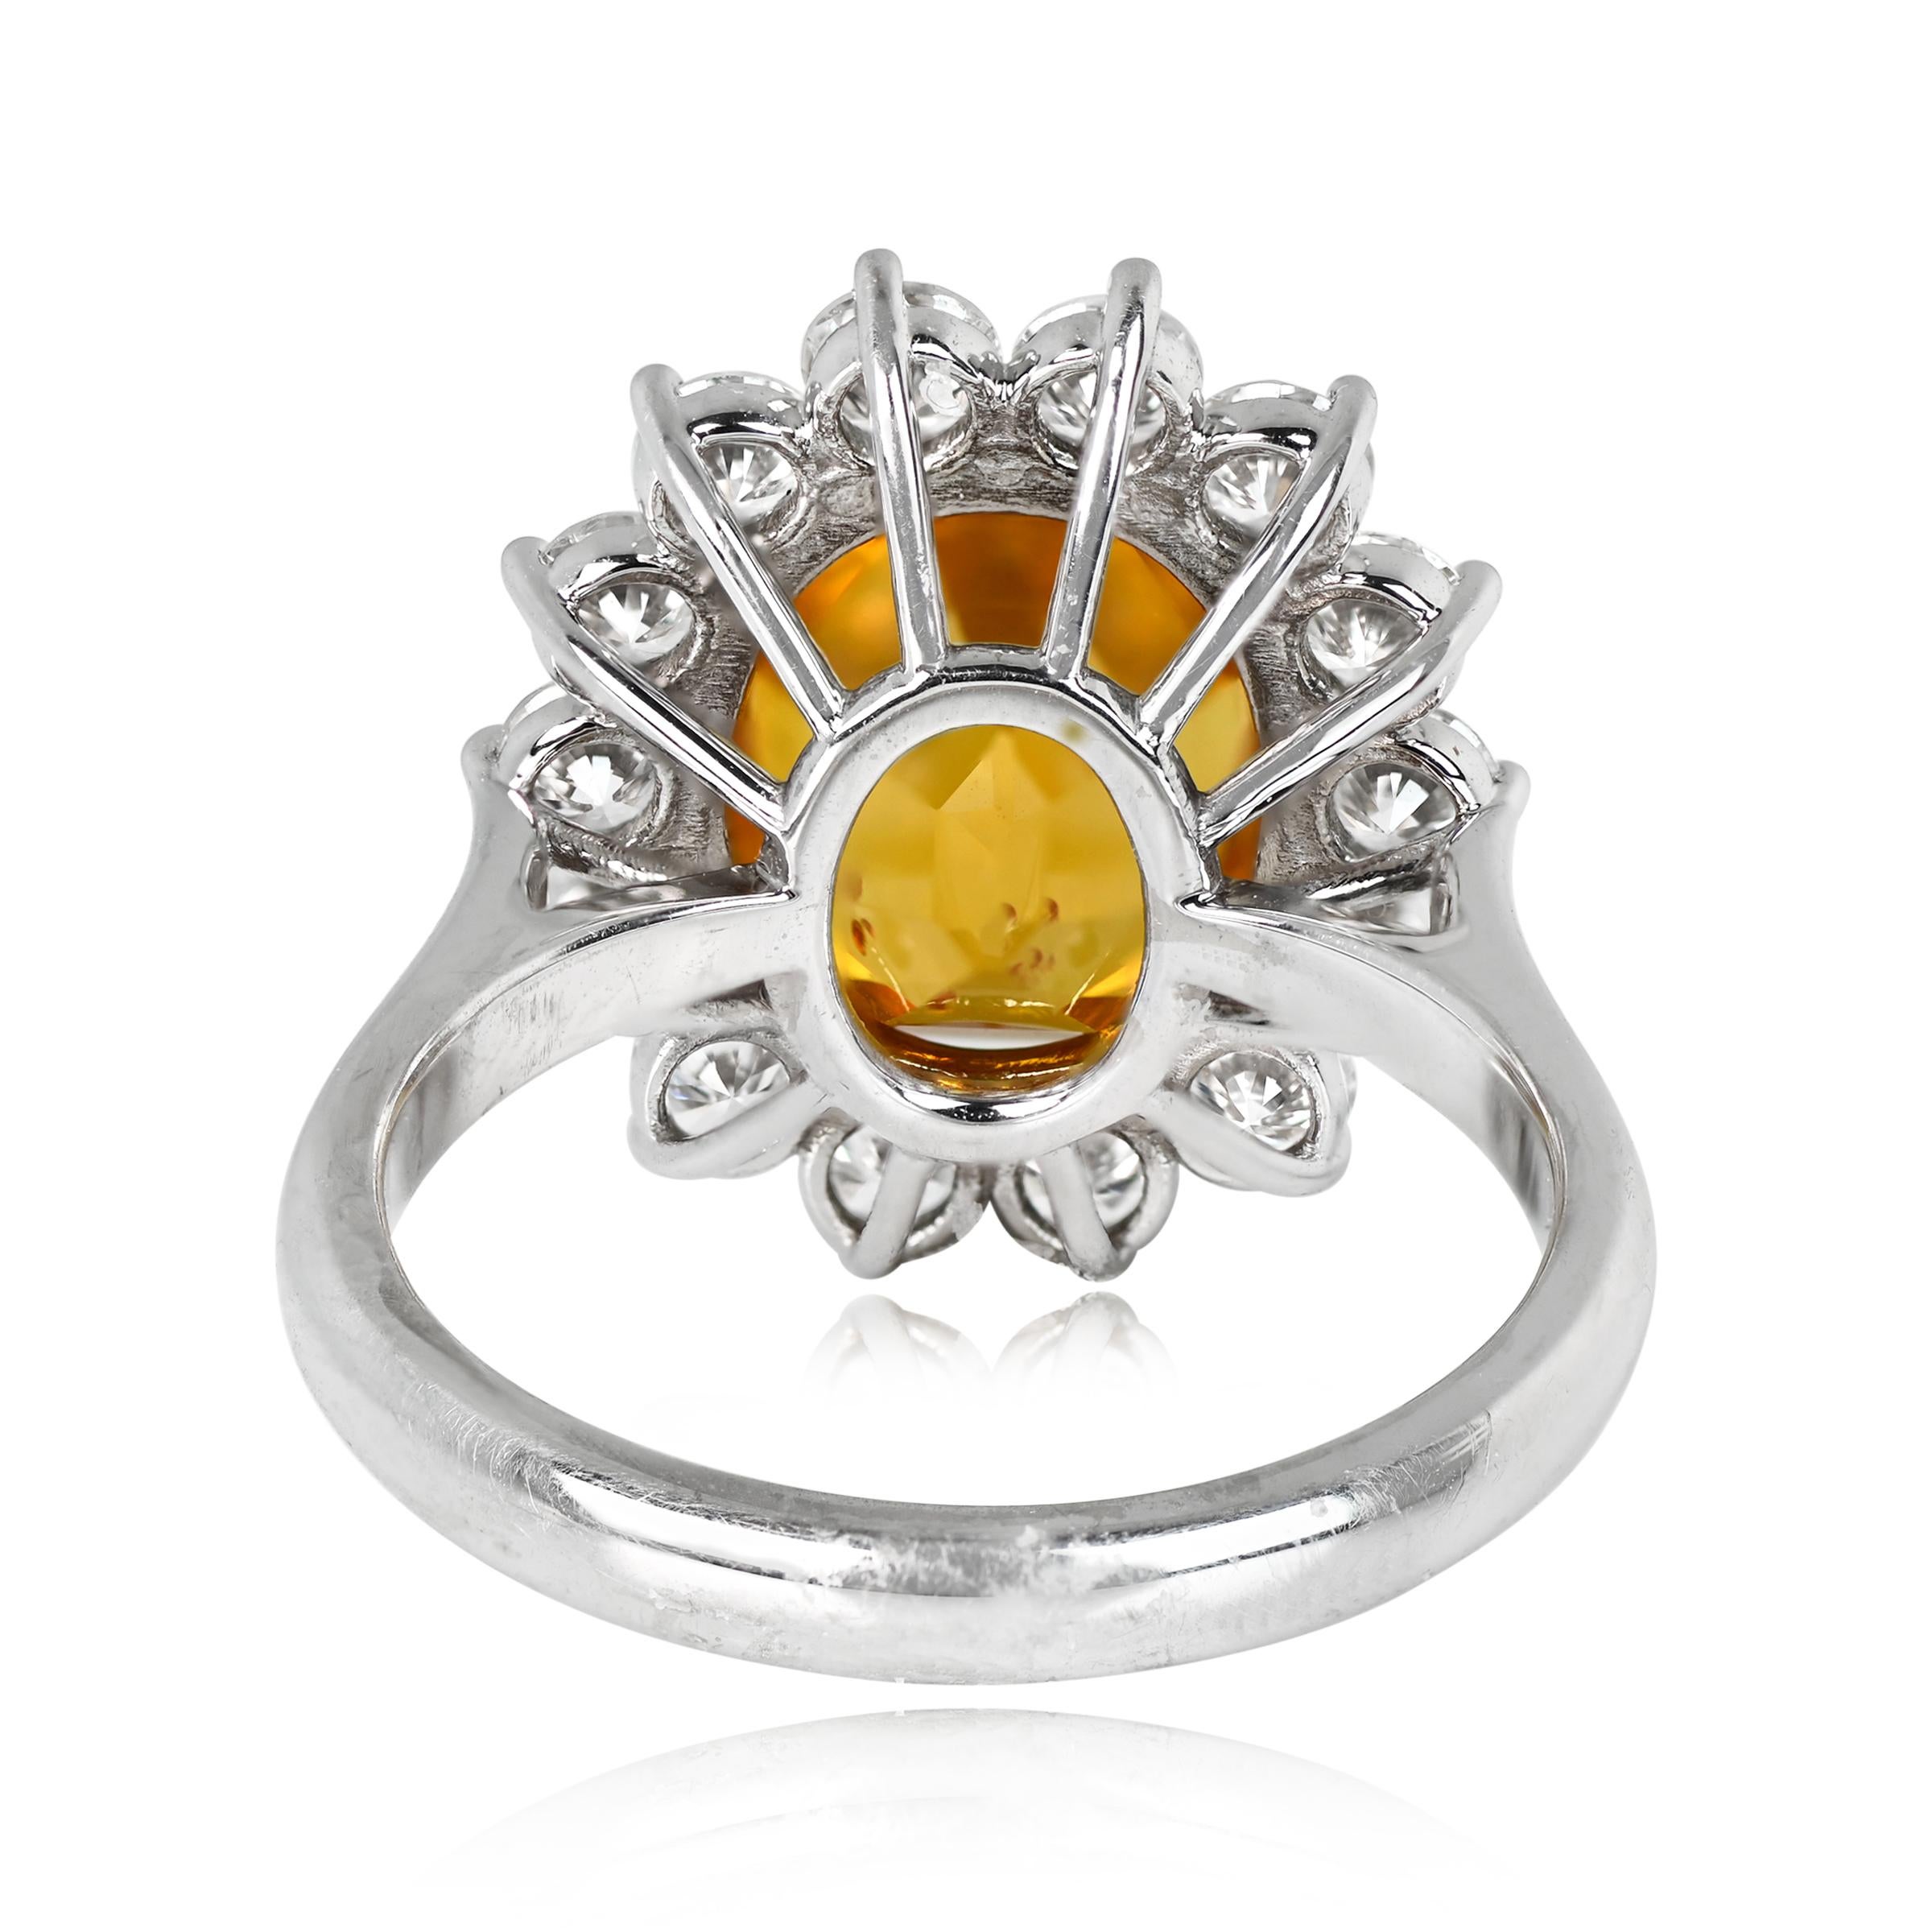 Art Deco AGL 5.46ct Oval Cut Yellow Sapphire Cocktail Ring, Diamond Halo, 18k White Gold For Sale